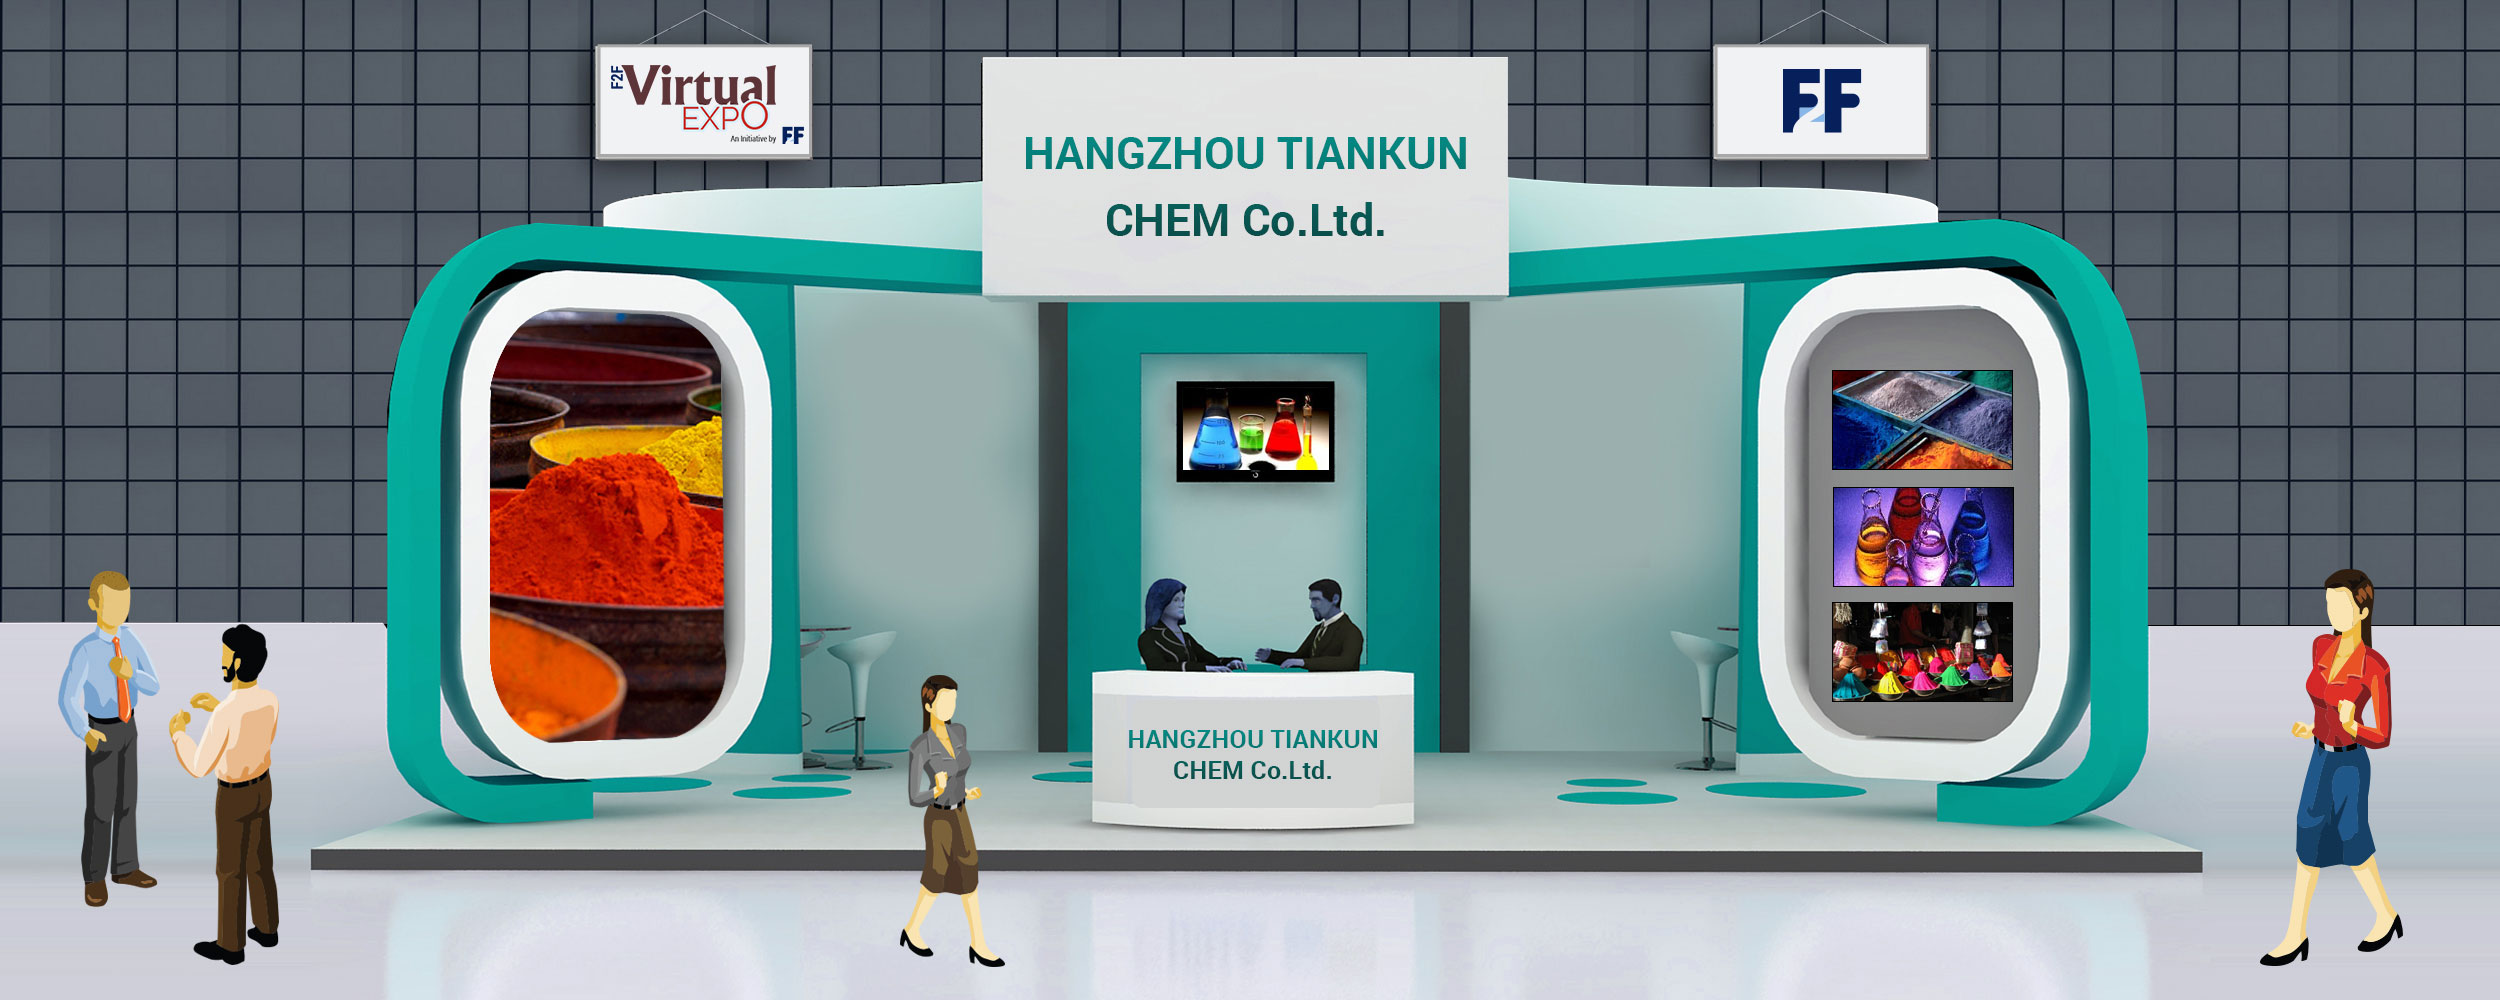 China Fabric Dye Powder Manufacturers, Suppliers and Factory - Wholesale  Products - Tiankun Chem